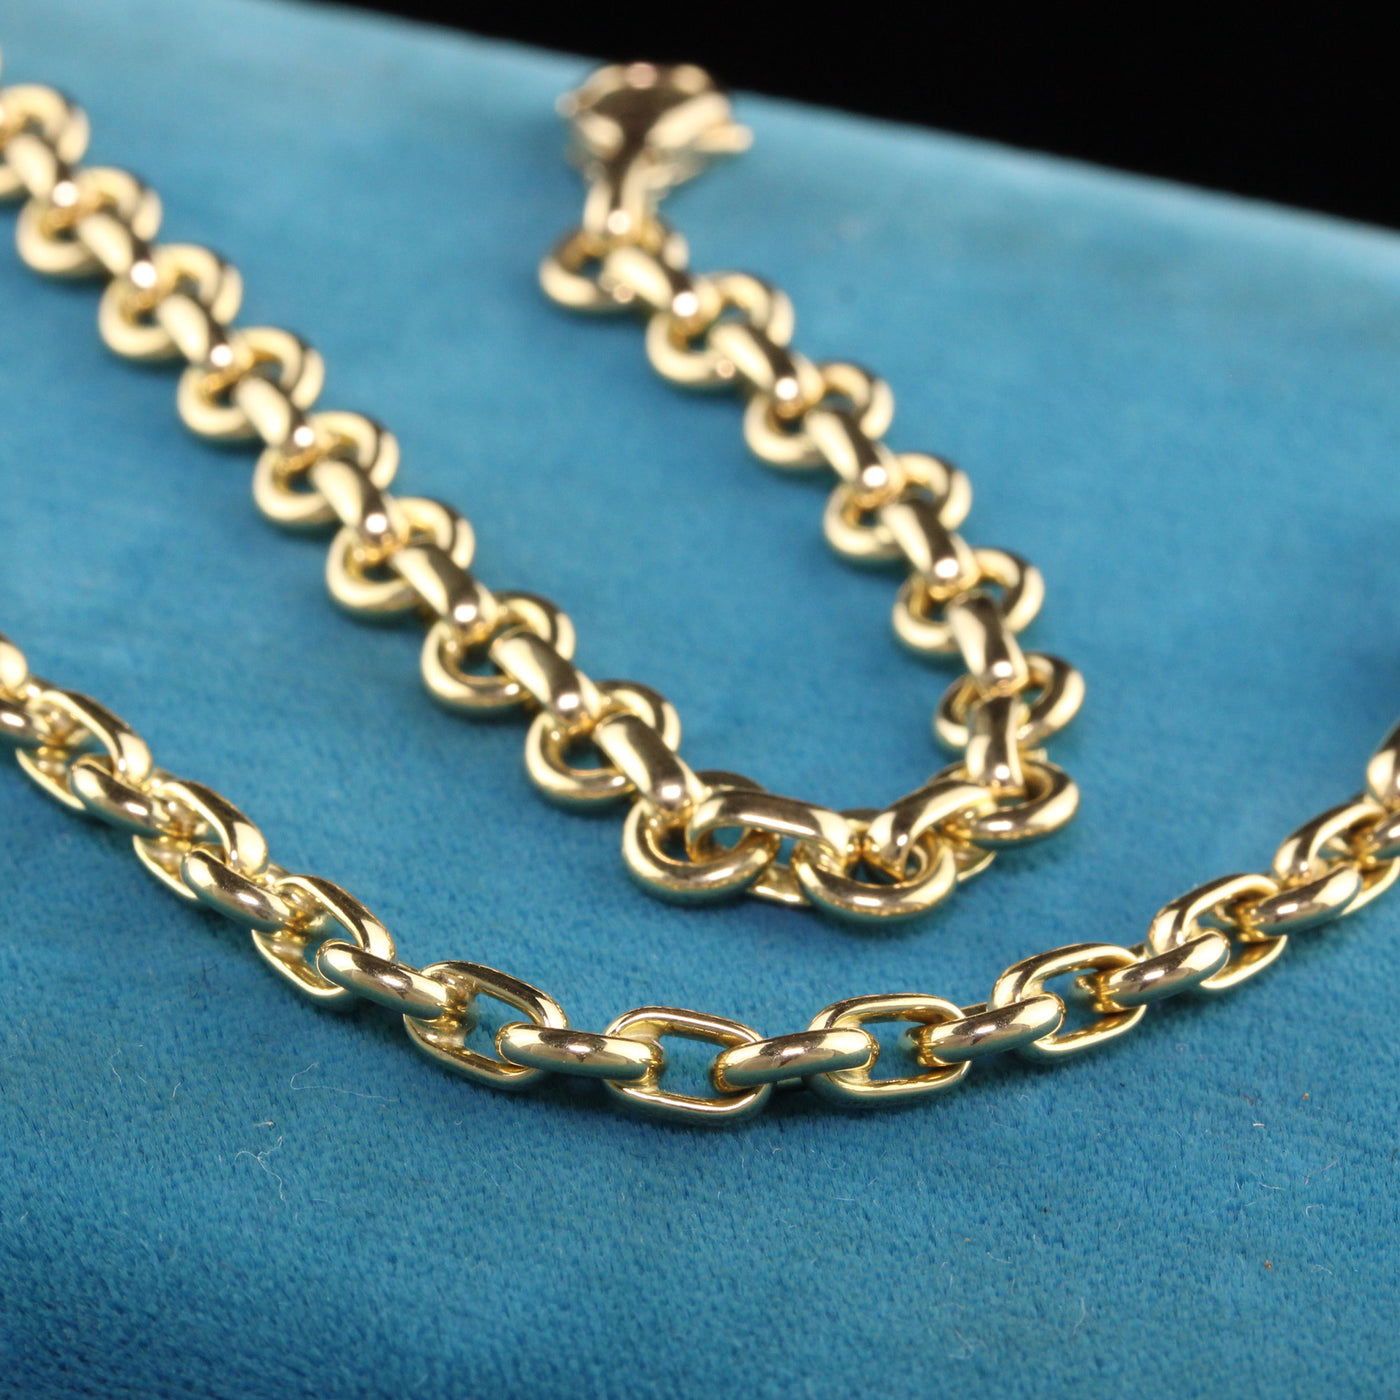 Vintage Tiffany and Co 18K Yellow Gold Link Chain - 13 Inches